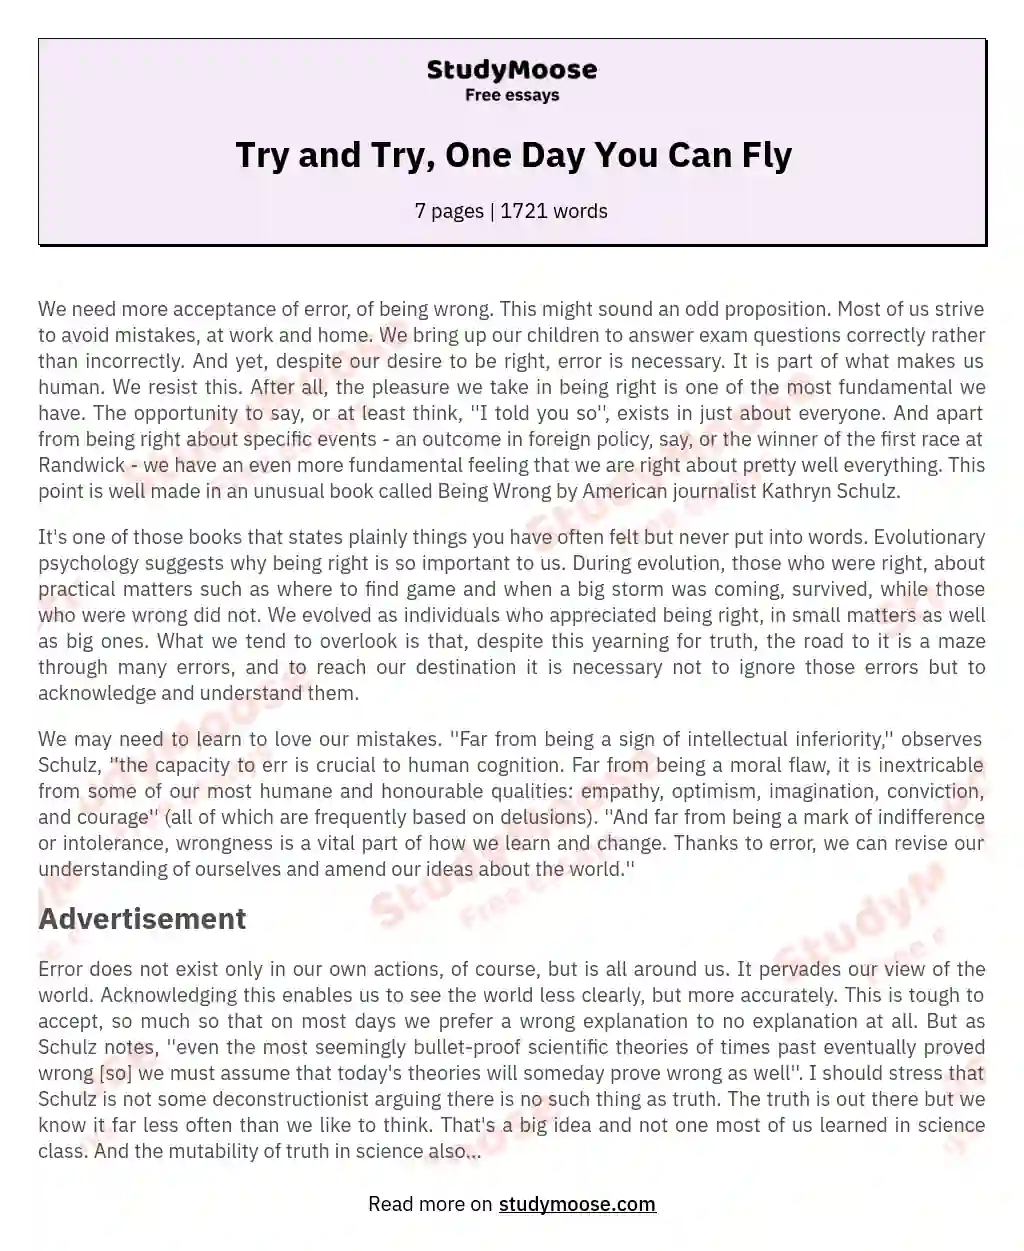 Try and Try, One Day You Can Fly essay